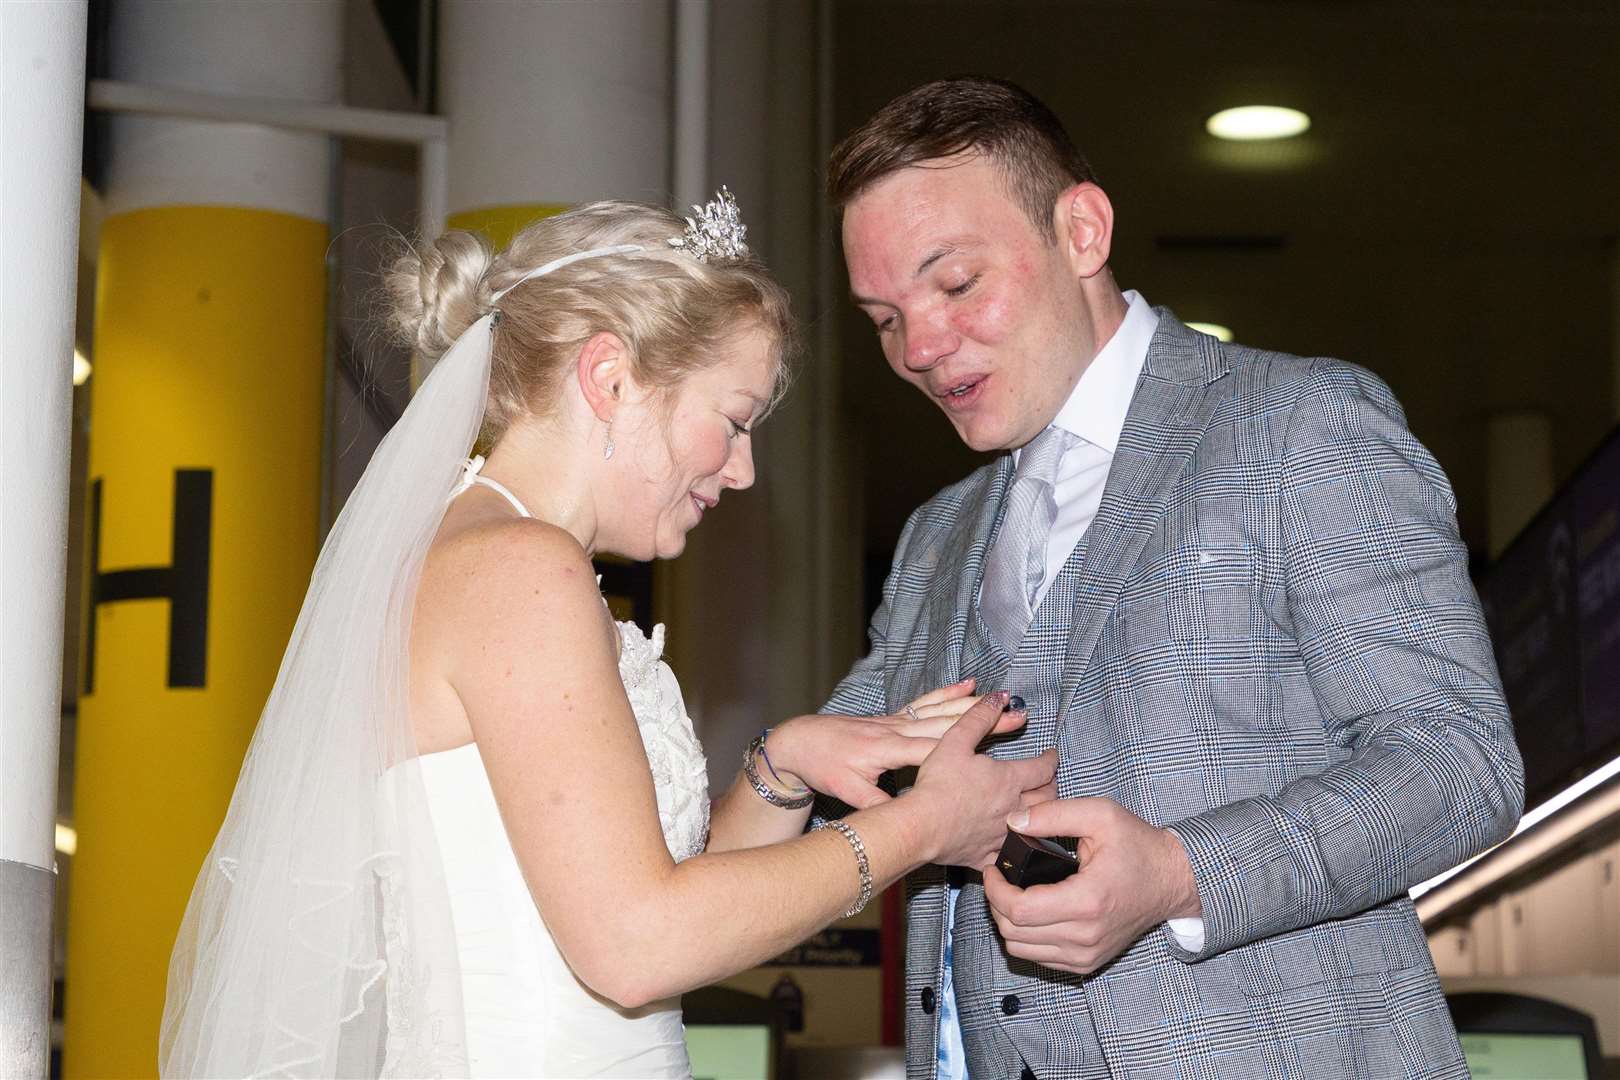 Sarah and Paul met in person for the first time as they flew to Las Vegas from Gatwick to get married